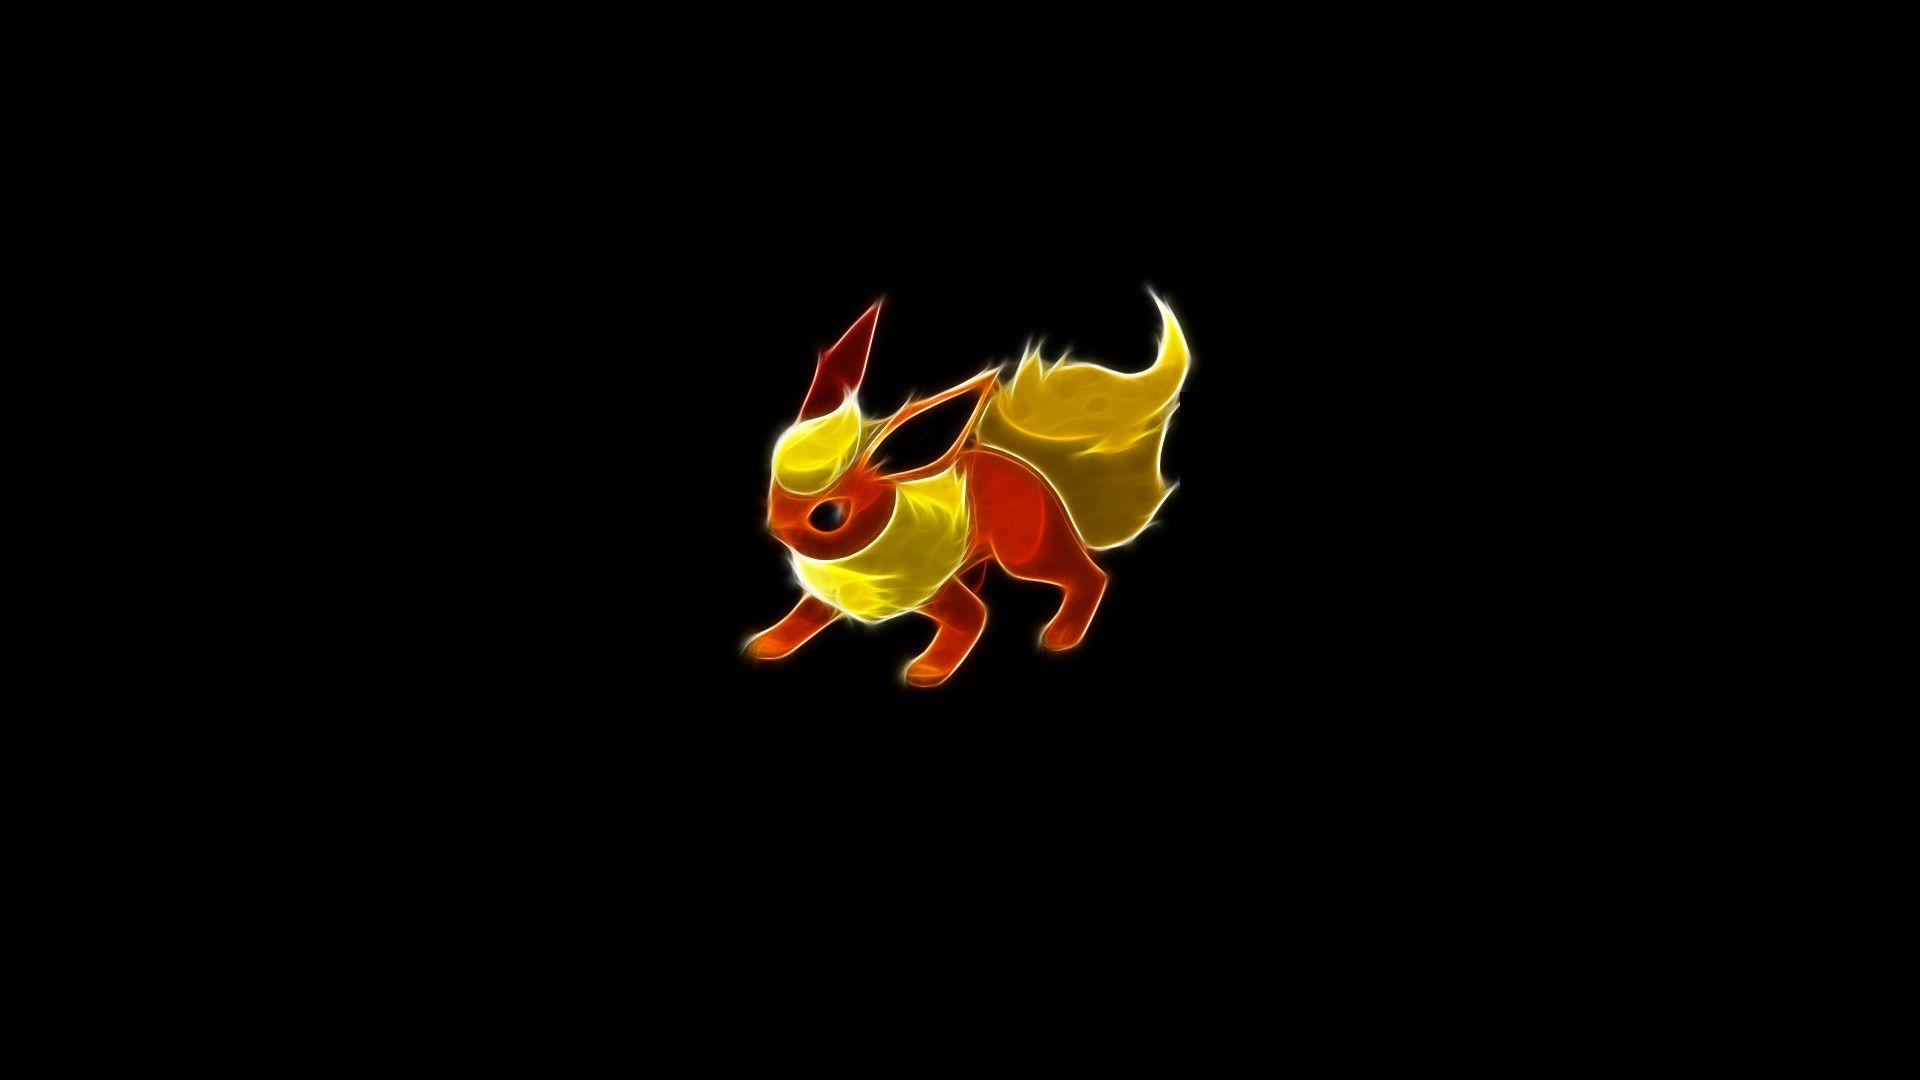 Pokemon flareon black backgrounds wallpapers High Quality